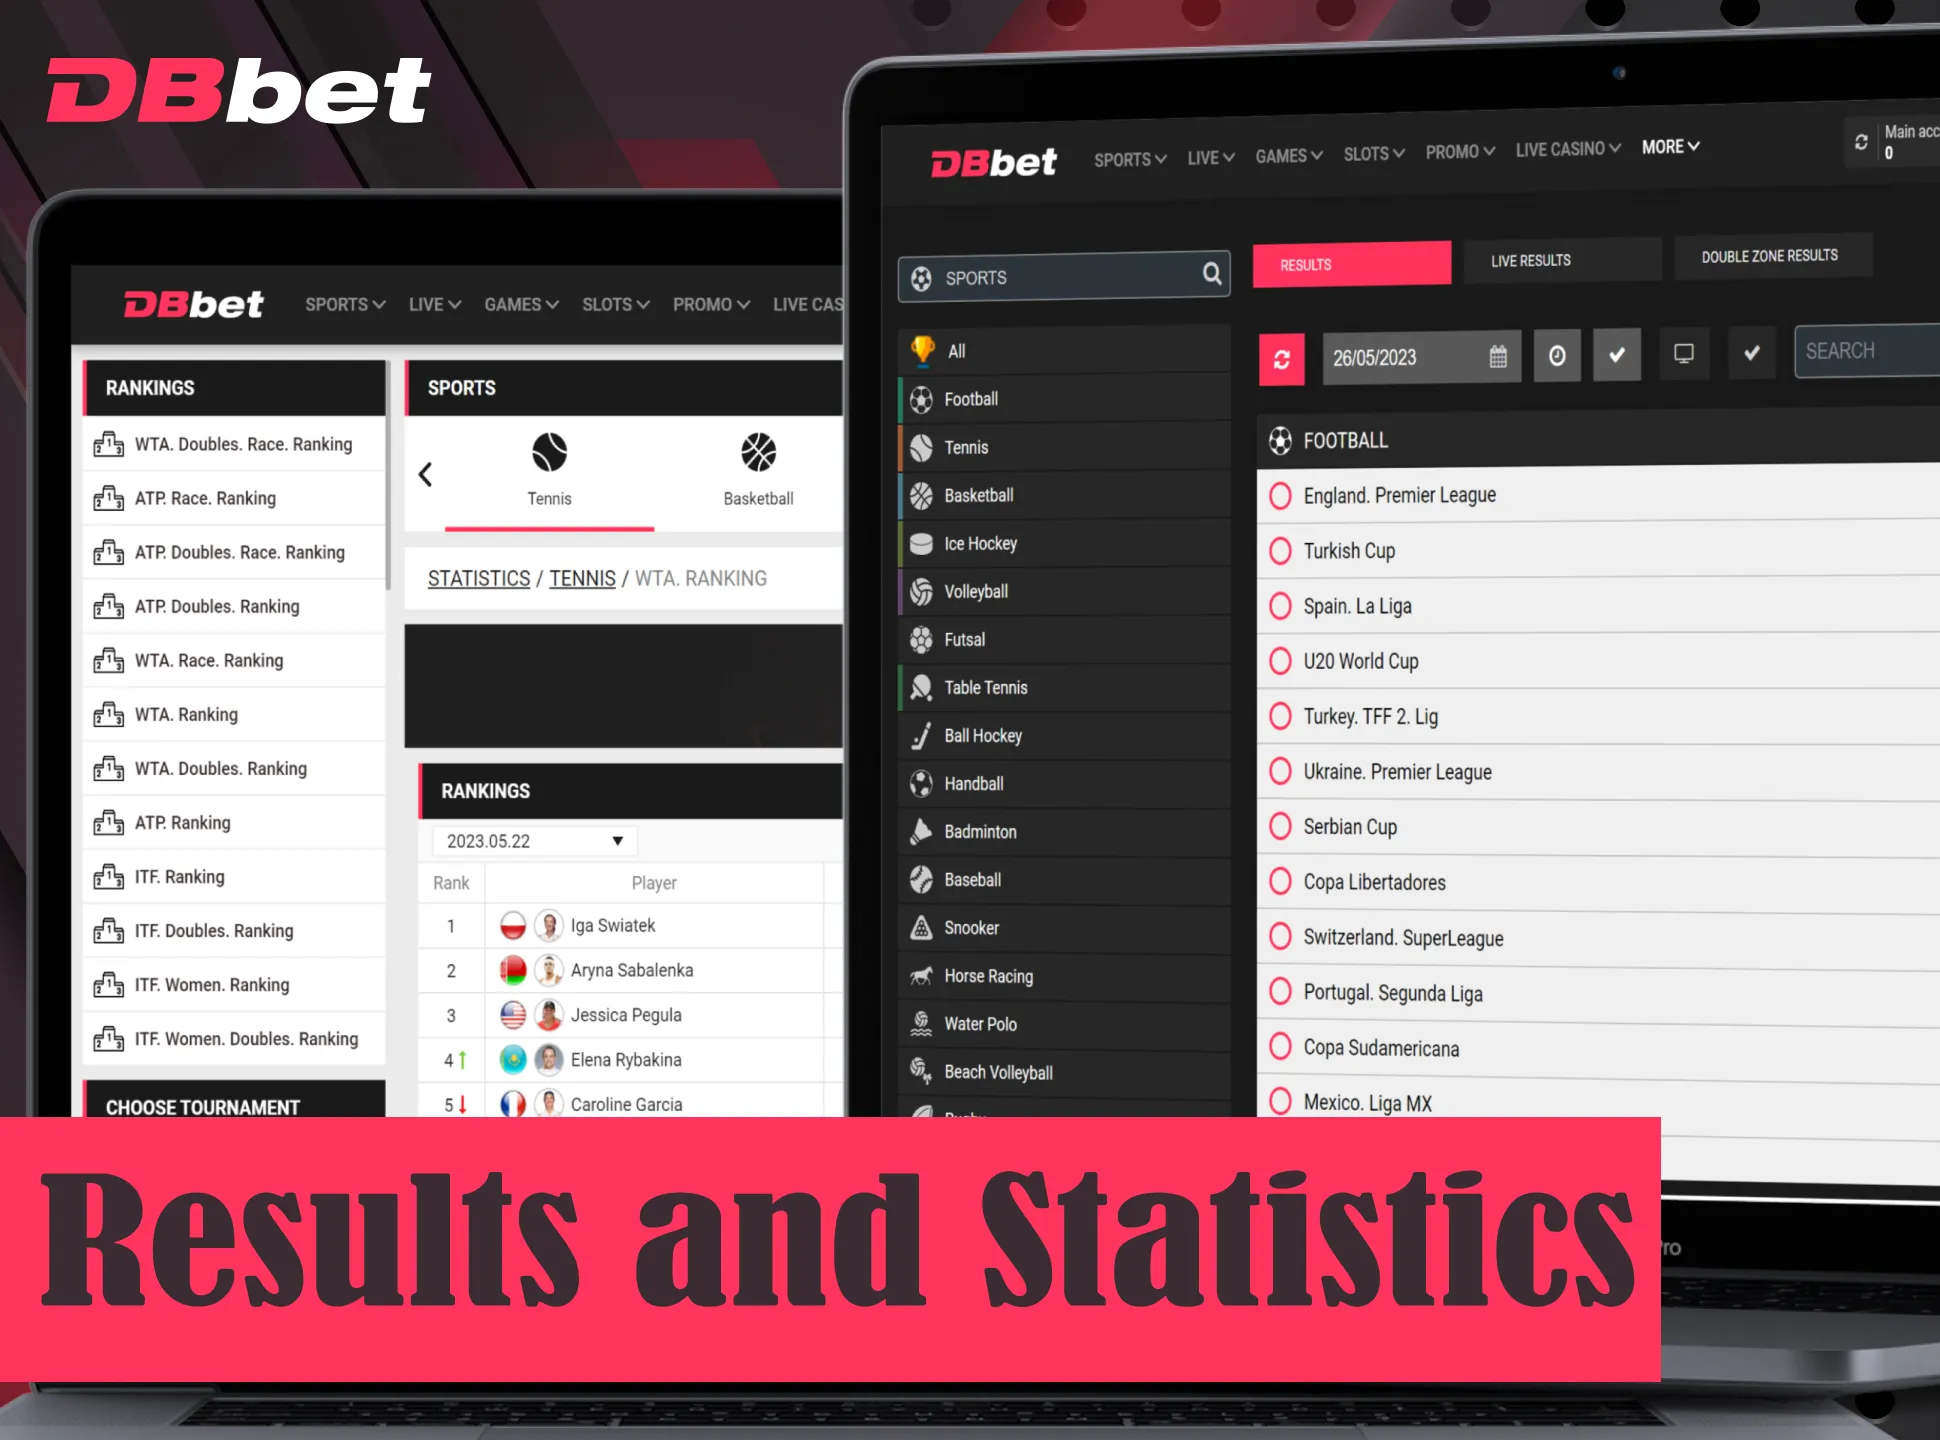 Check results and statistics of previous matches at DBbet.